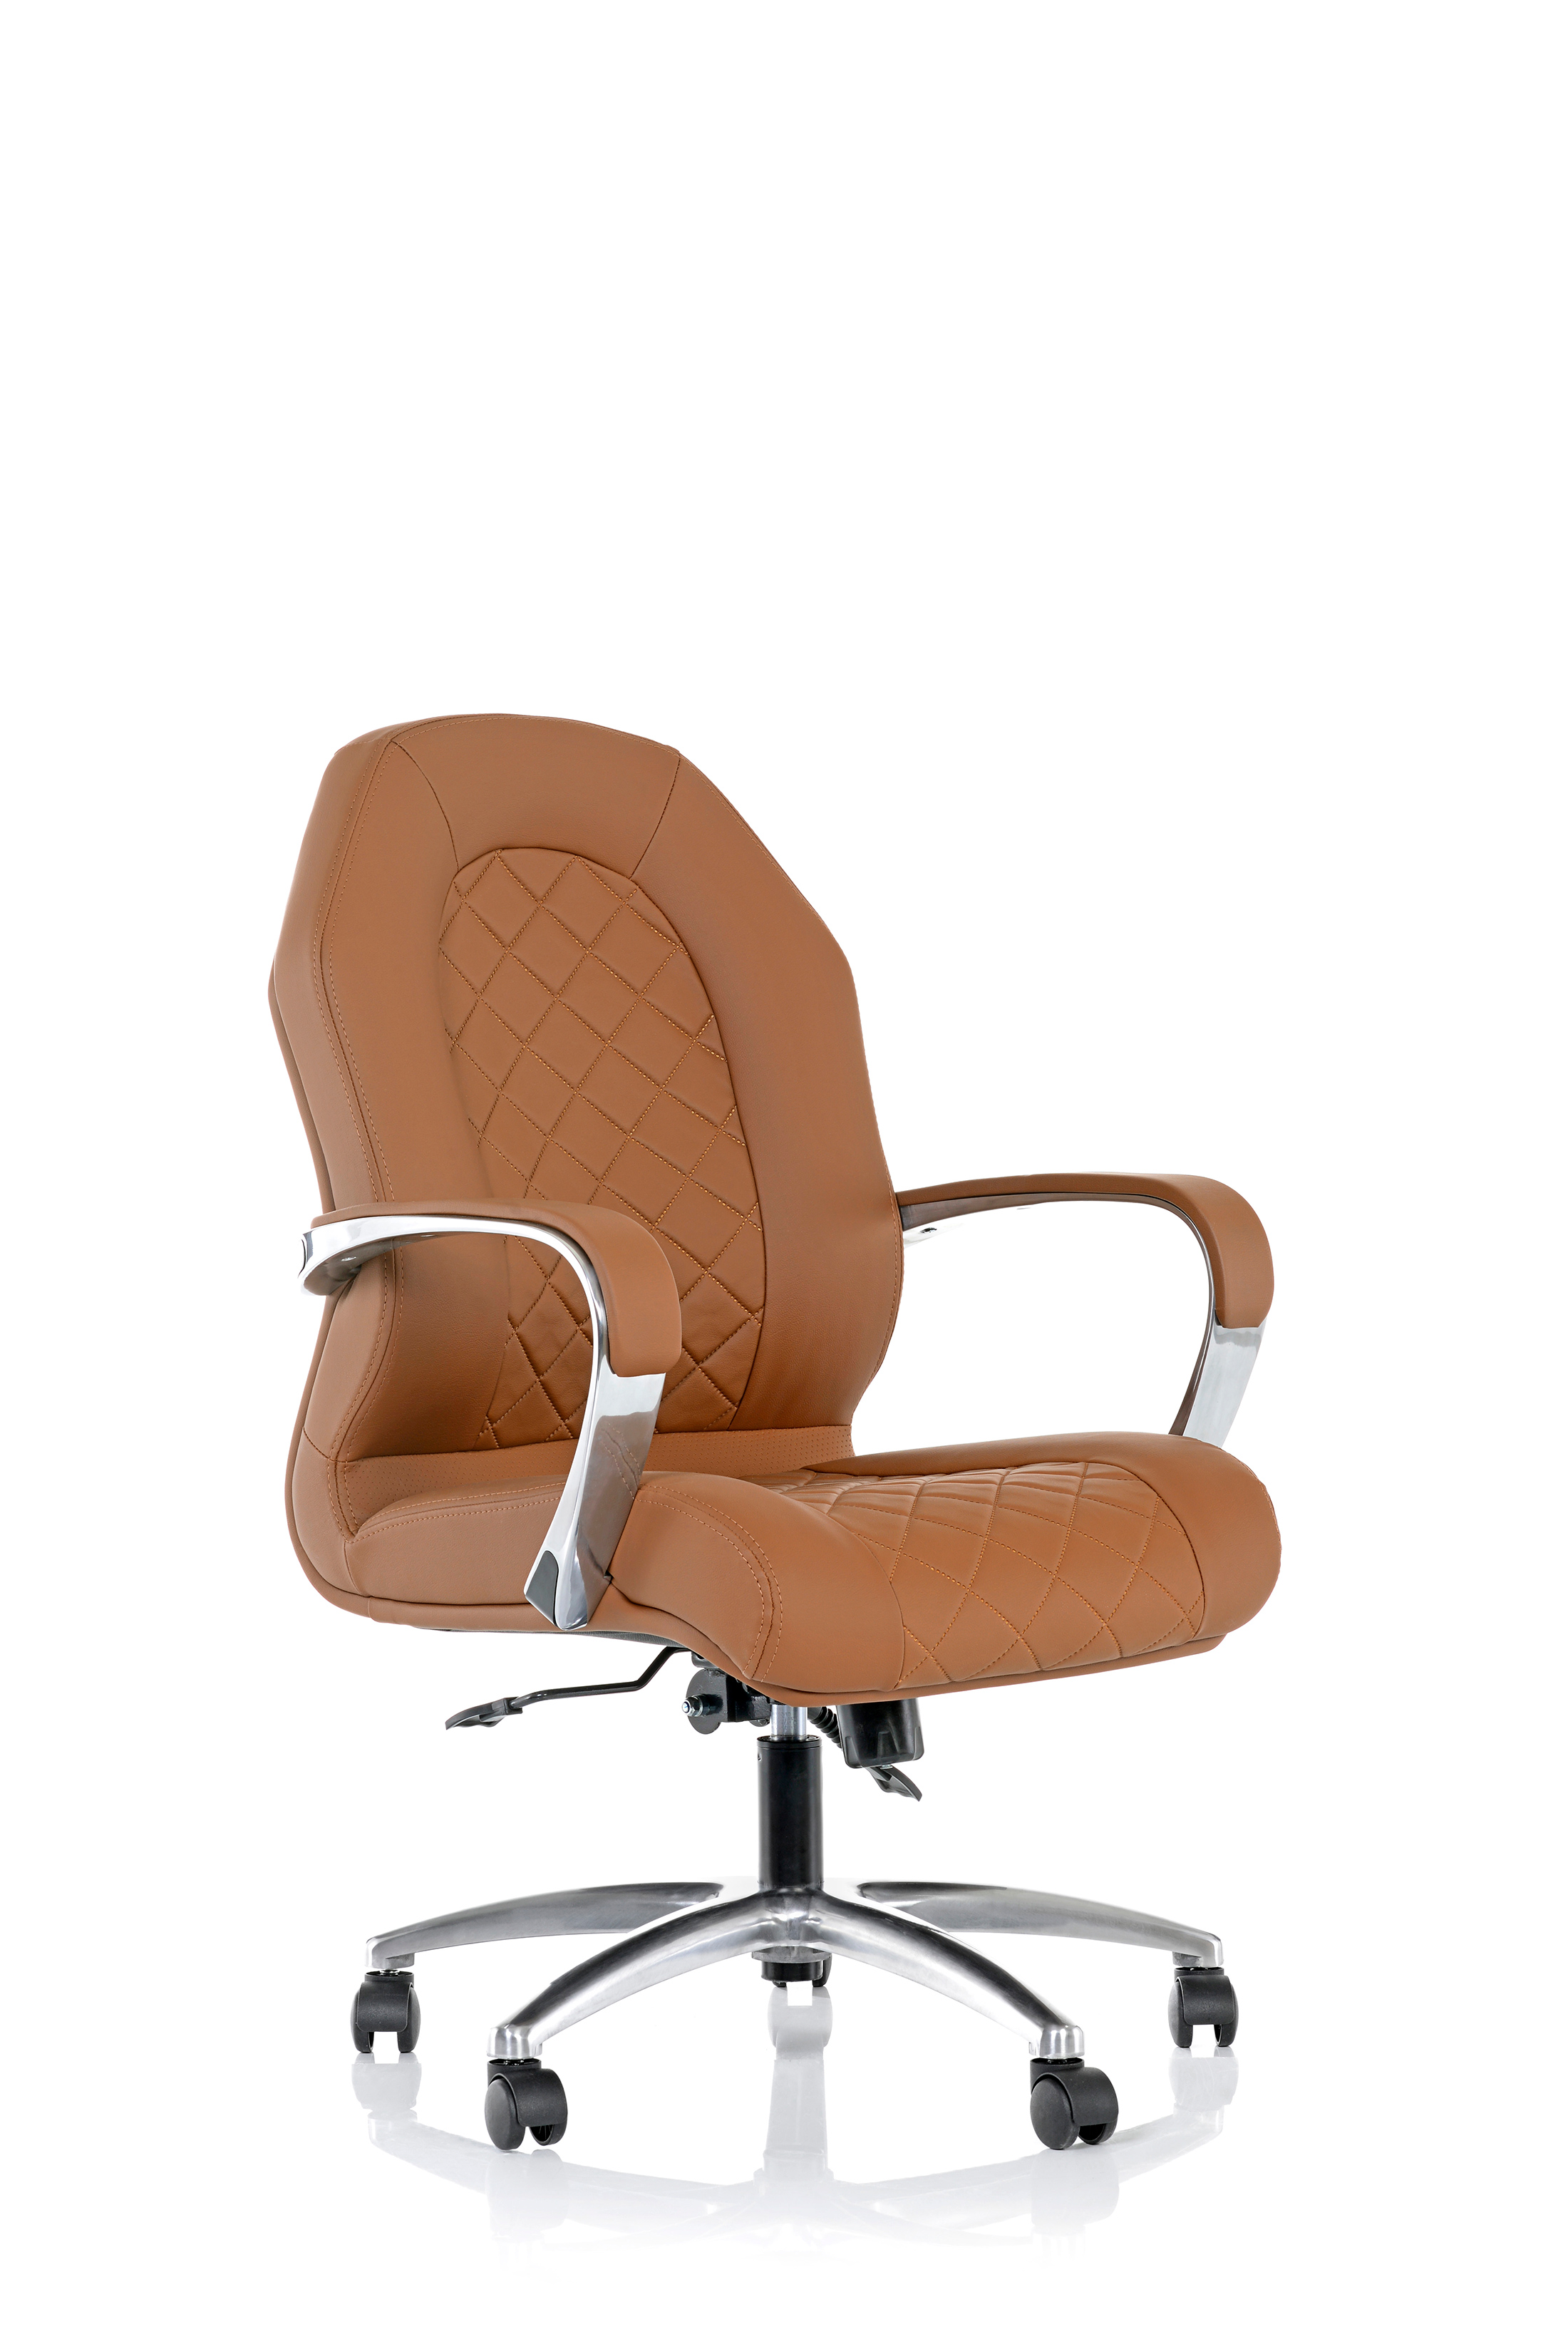 FORTE 100C CHIEF CHAIR